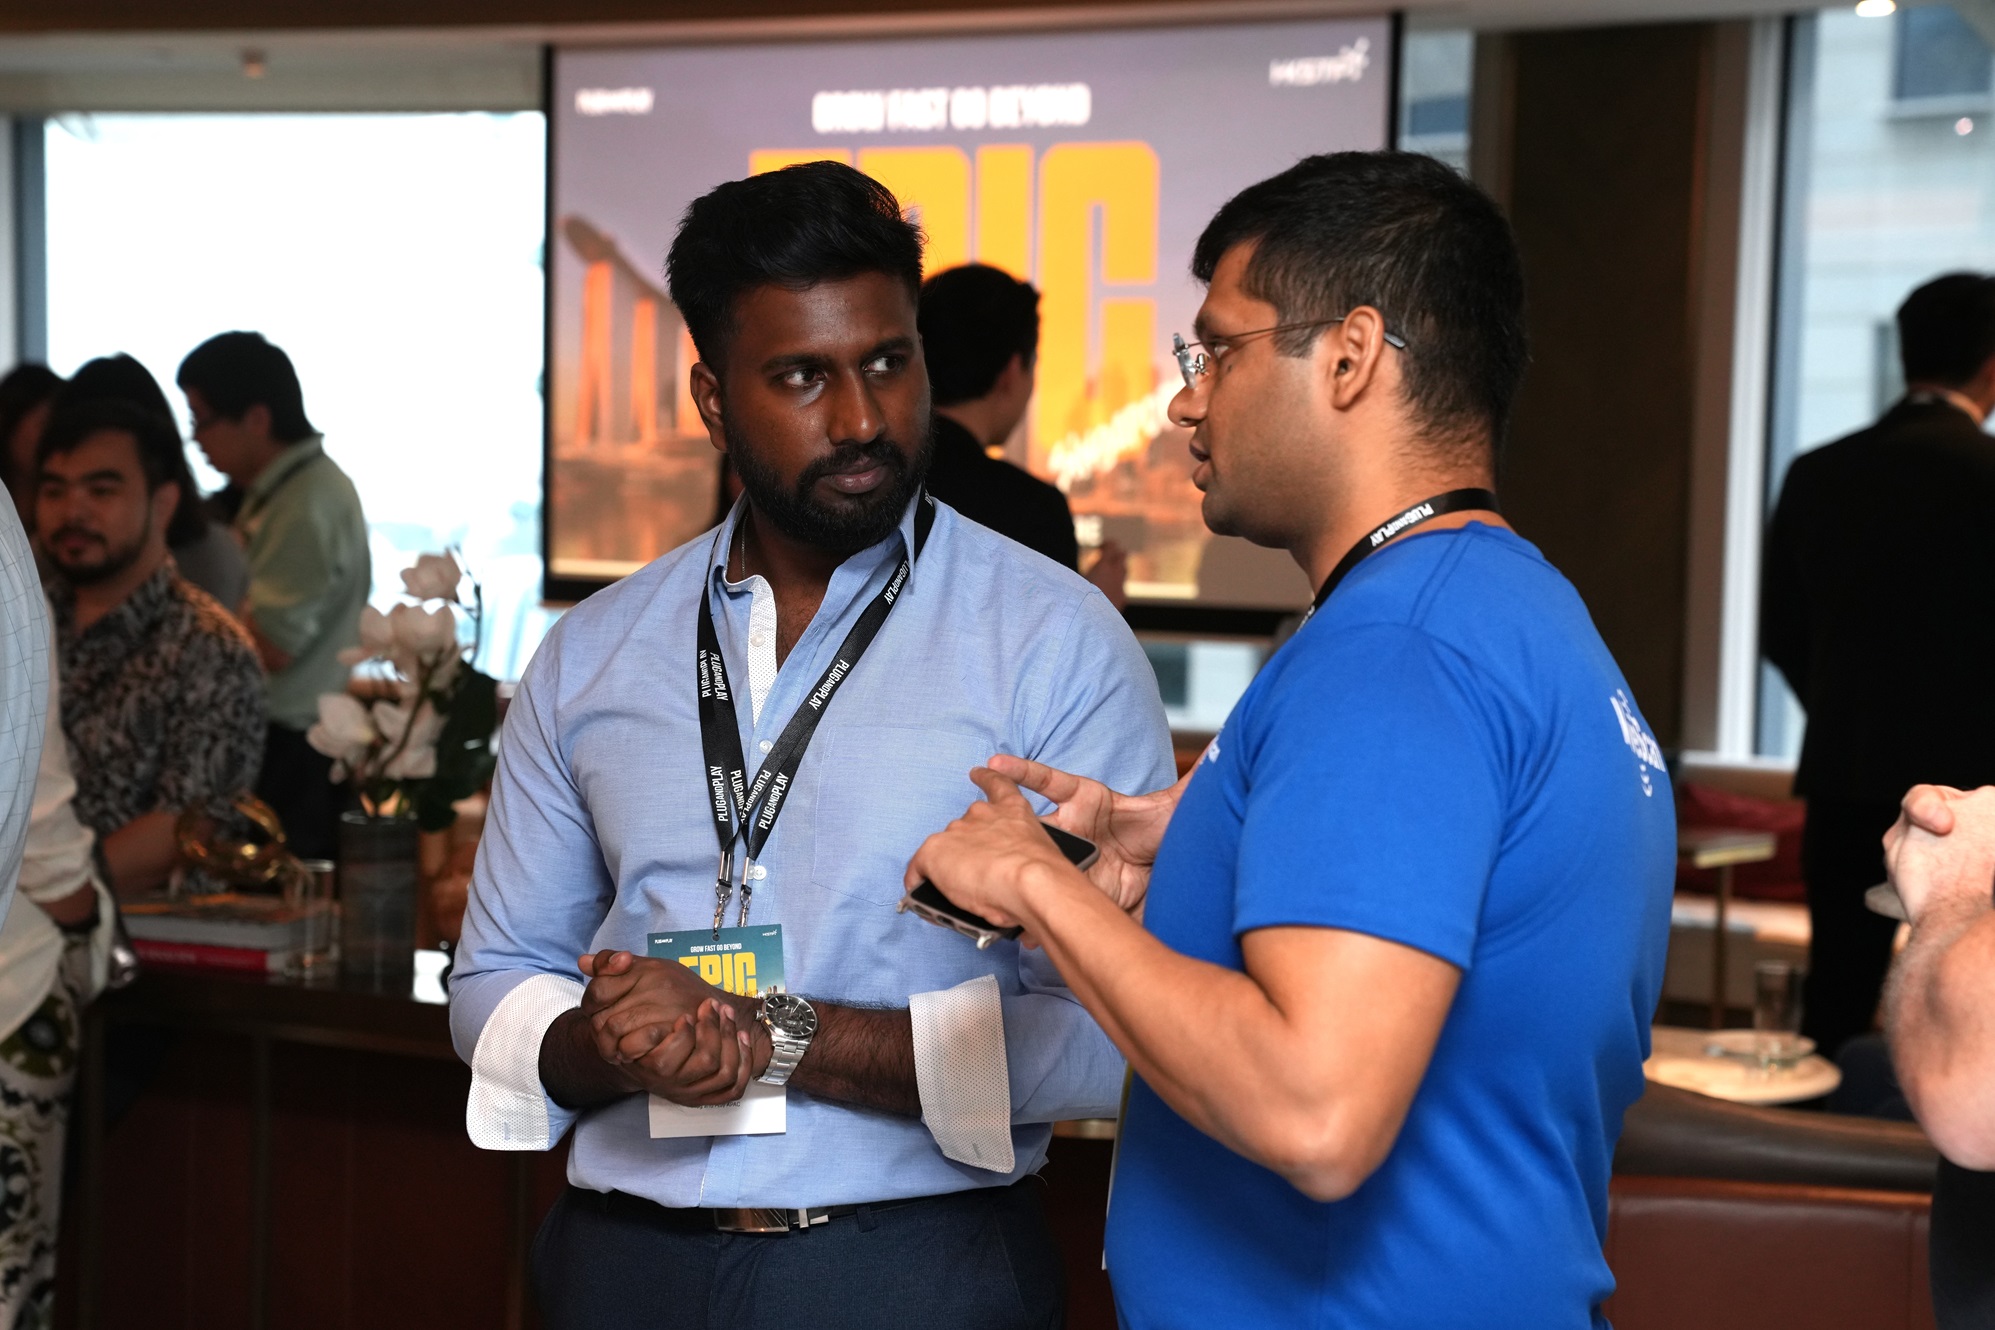 Photo 3-5: Featured startups showcased FinTech, PropTech and MobilityTech innovations on Day 1-2.